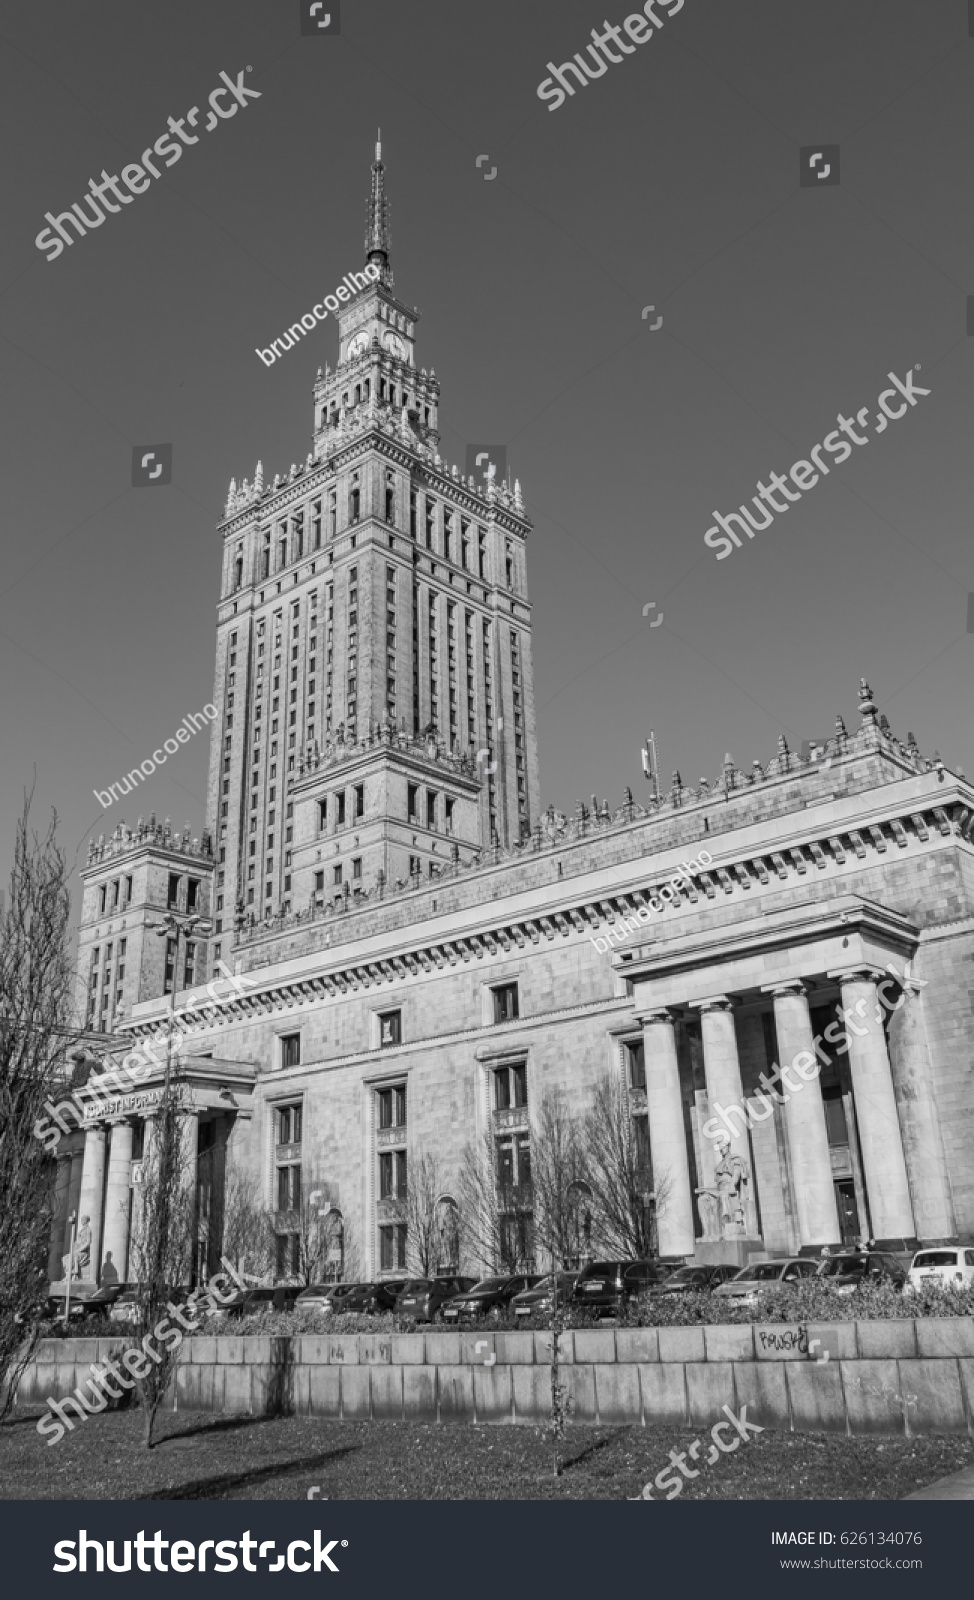 Palace of Culture and Science IV #626134076